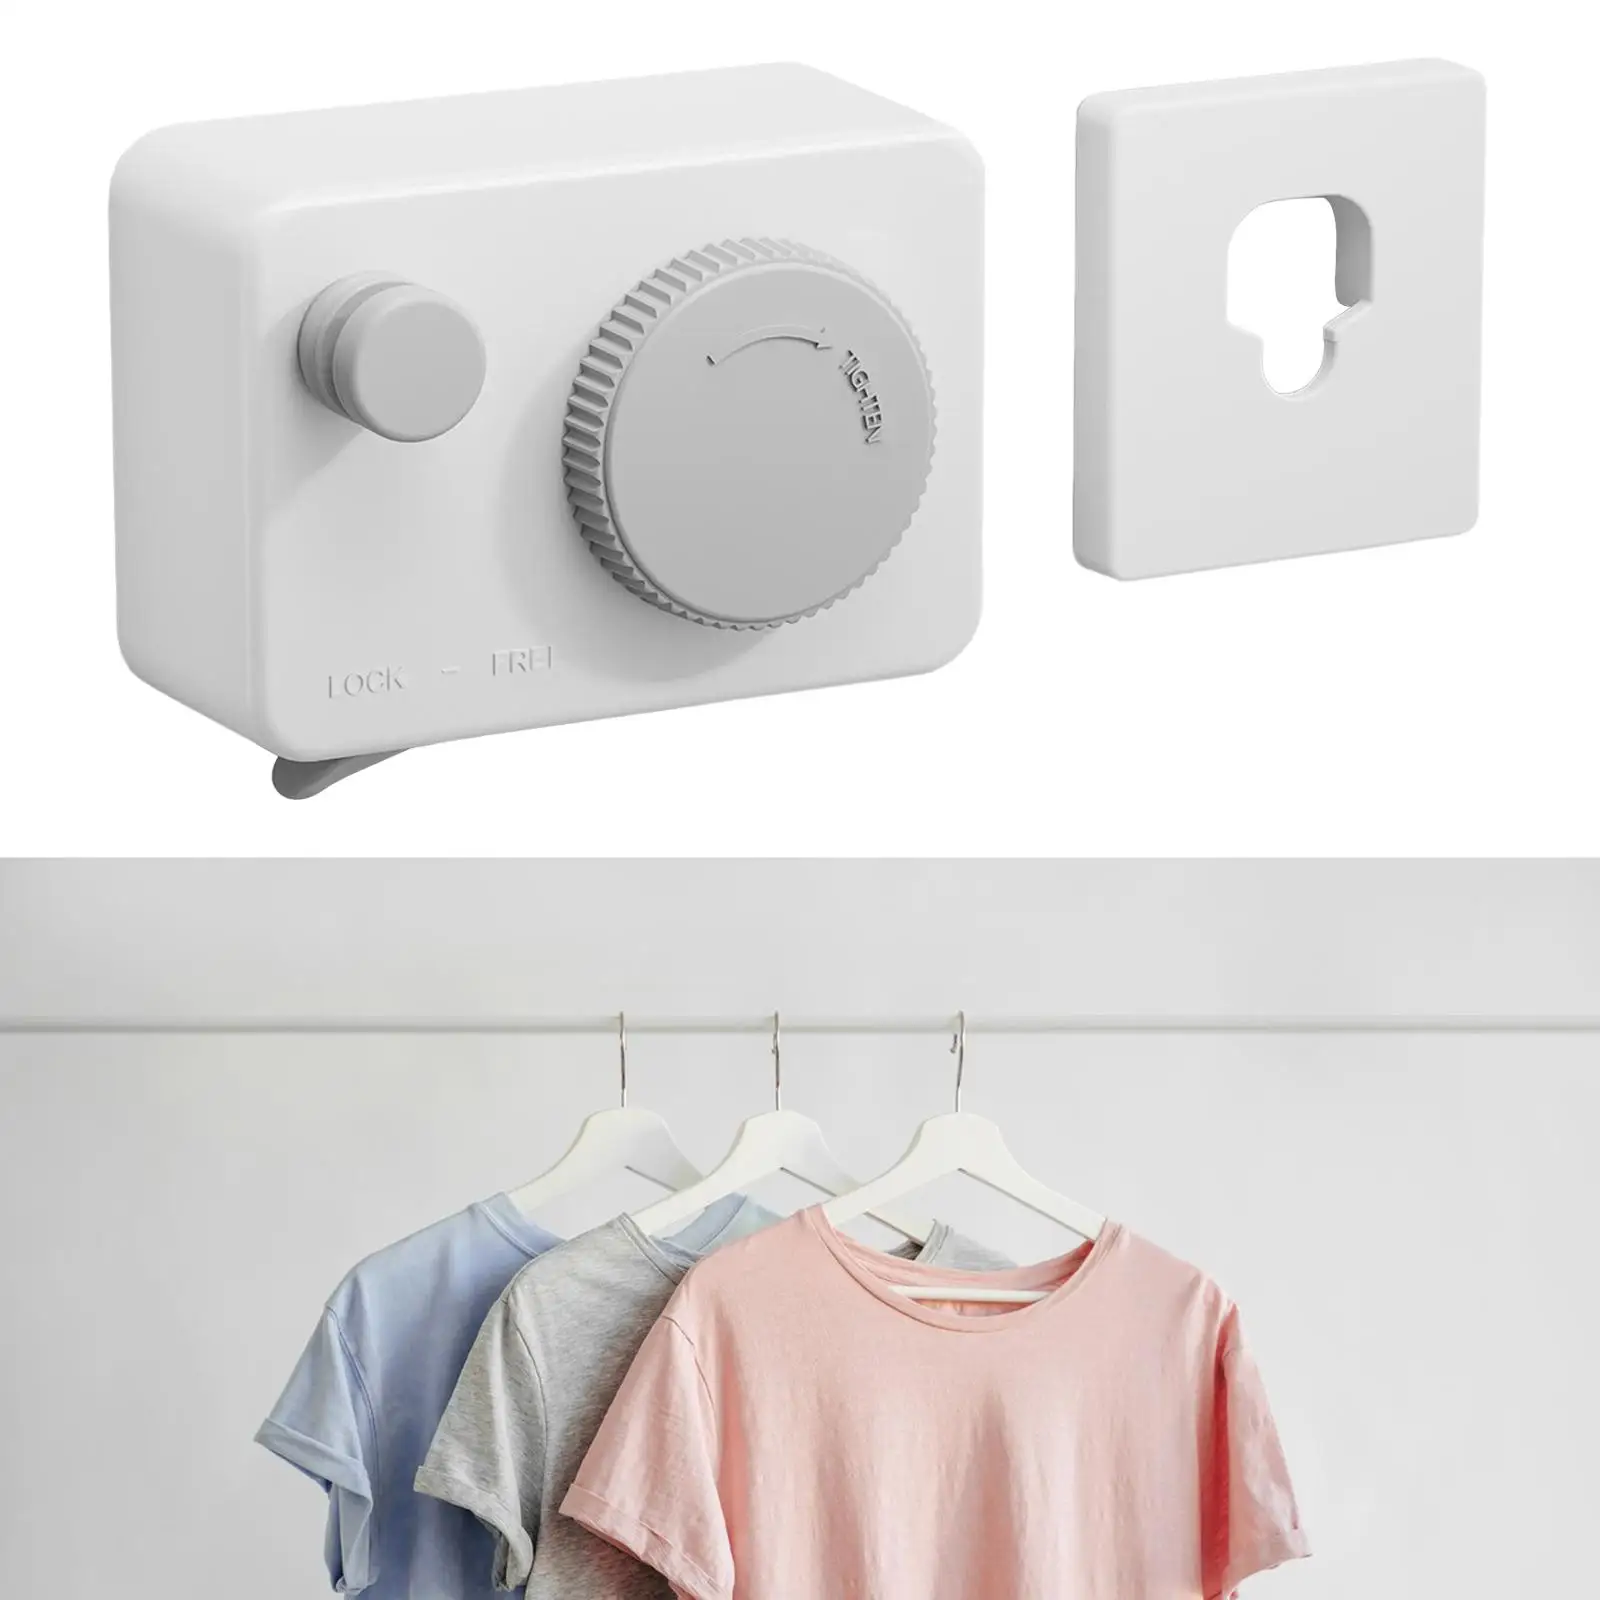 Wall Mounted Retractable Shower Clothesline Retractable Laundry Rope Hanger Laundry Rack for Bathroom Indoor Outdoor